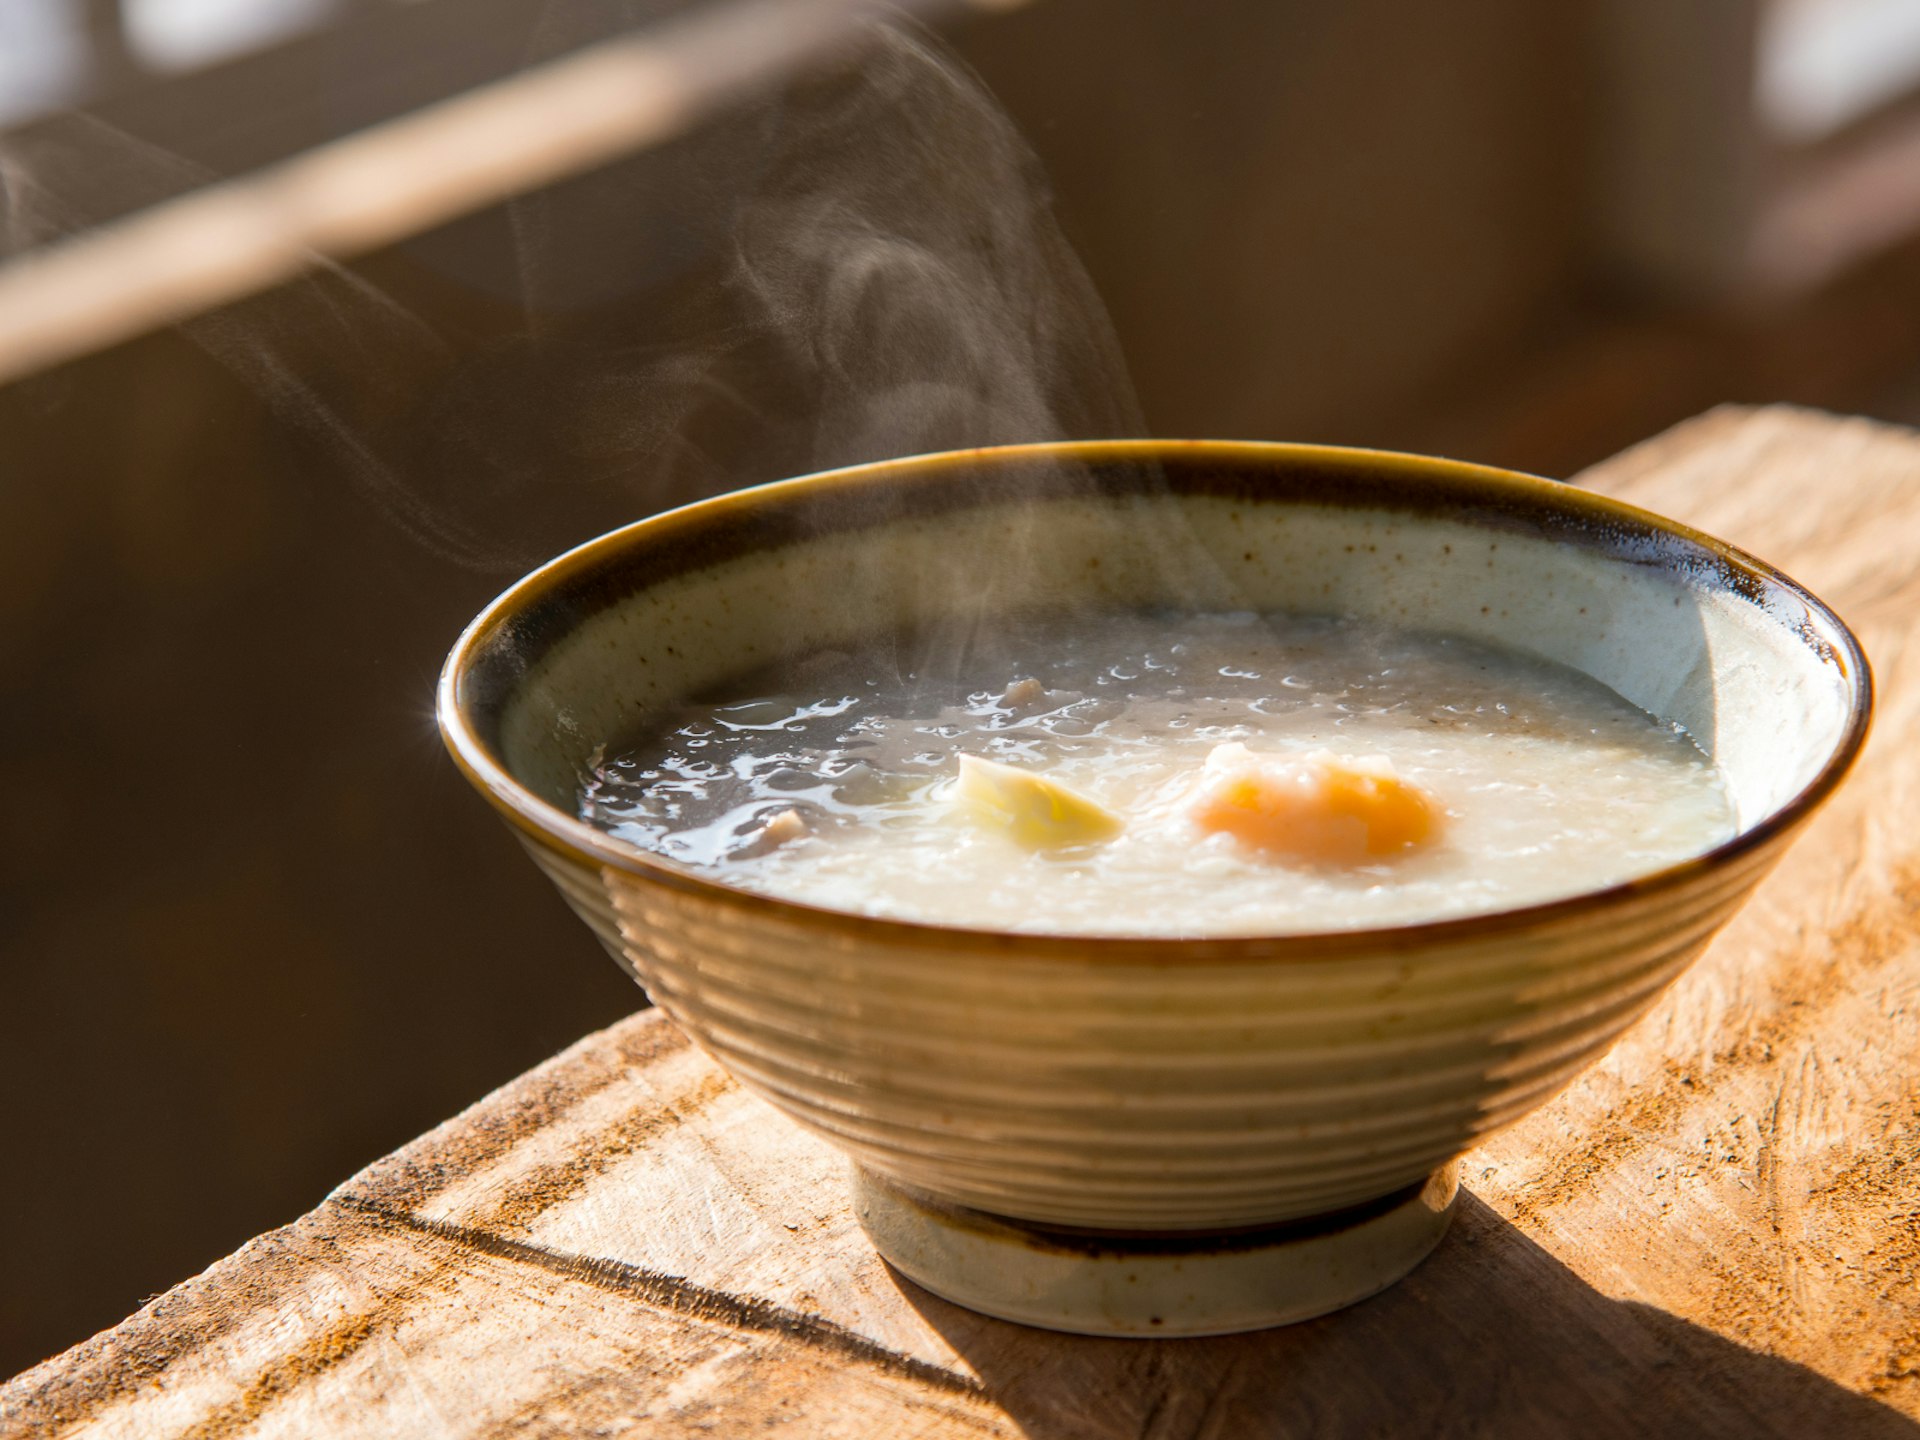 A steaming bowl of congee on a wooden table in China